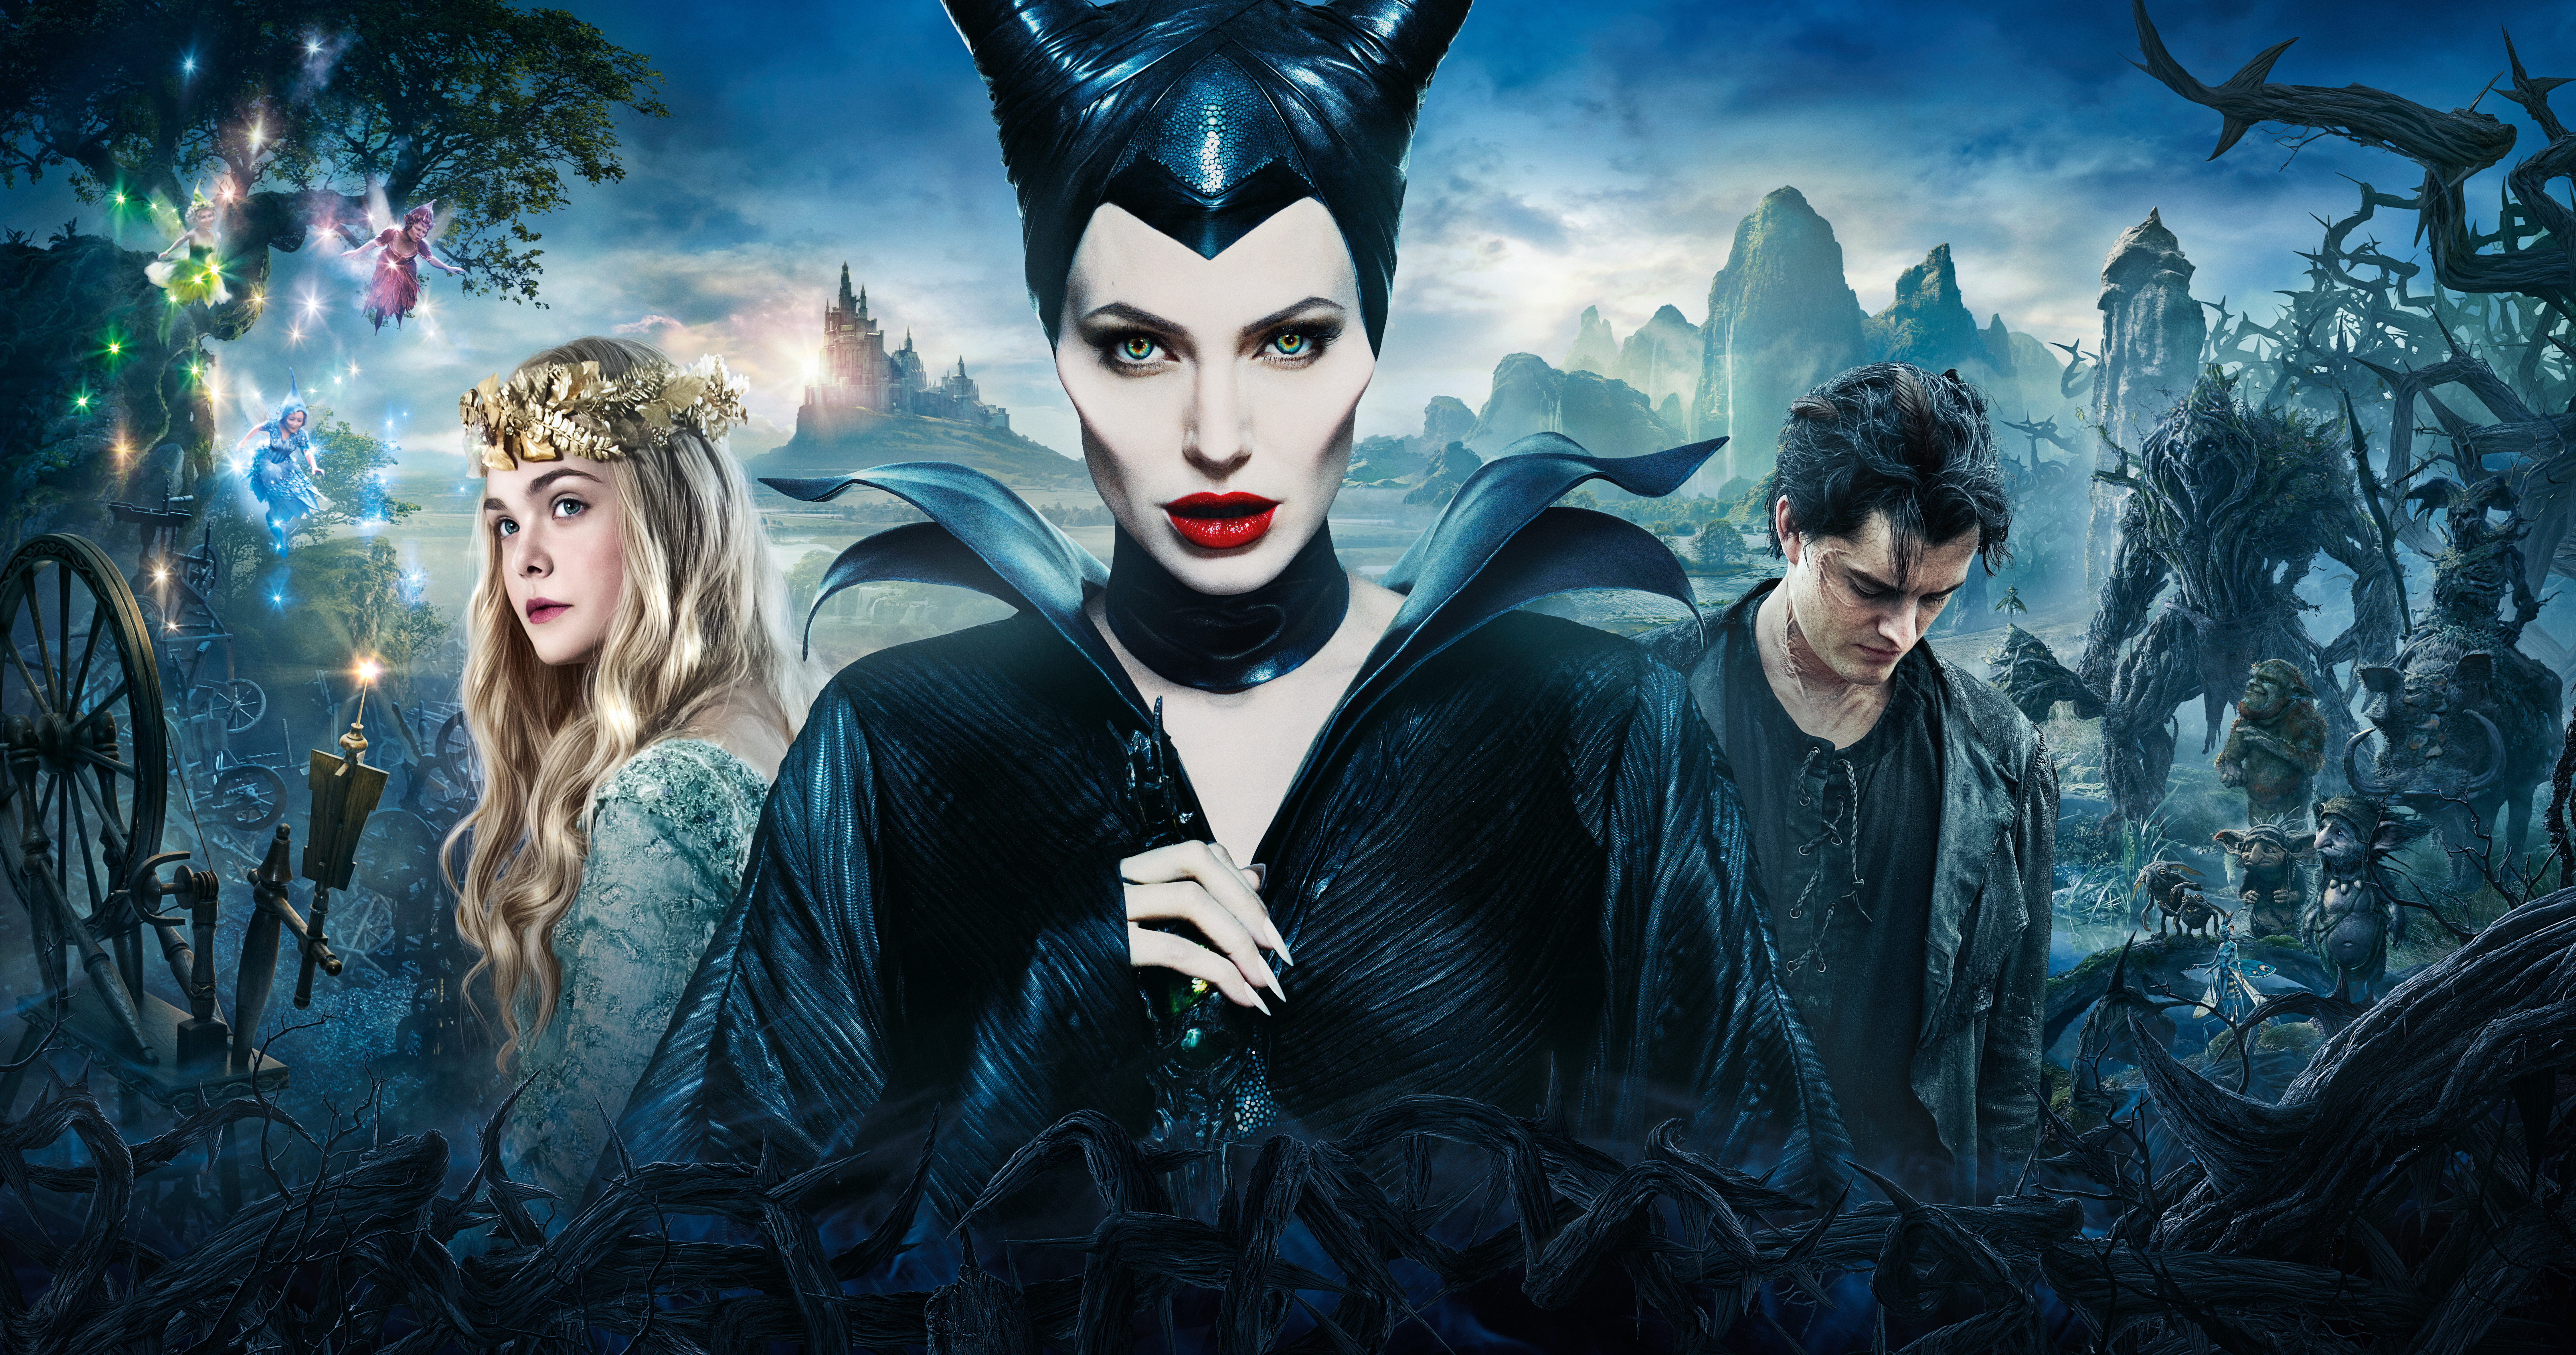 Wallpapers The movie Maleficent: mistress of the dark fantasy adventure on the desktop